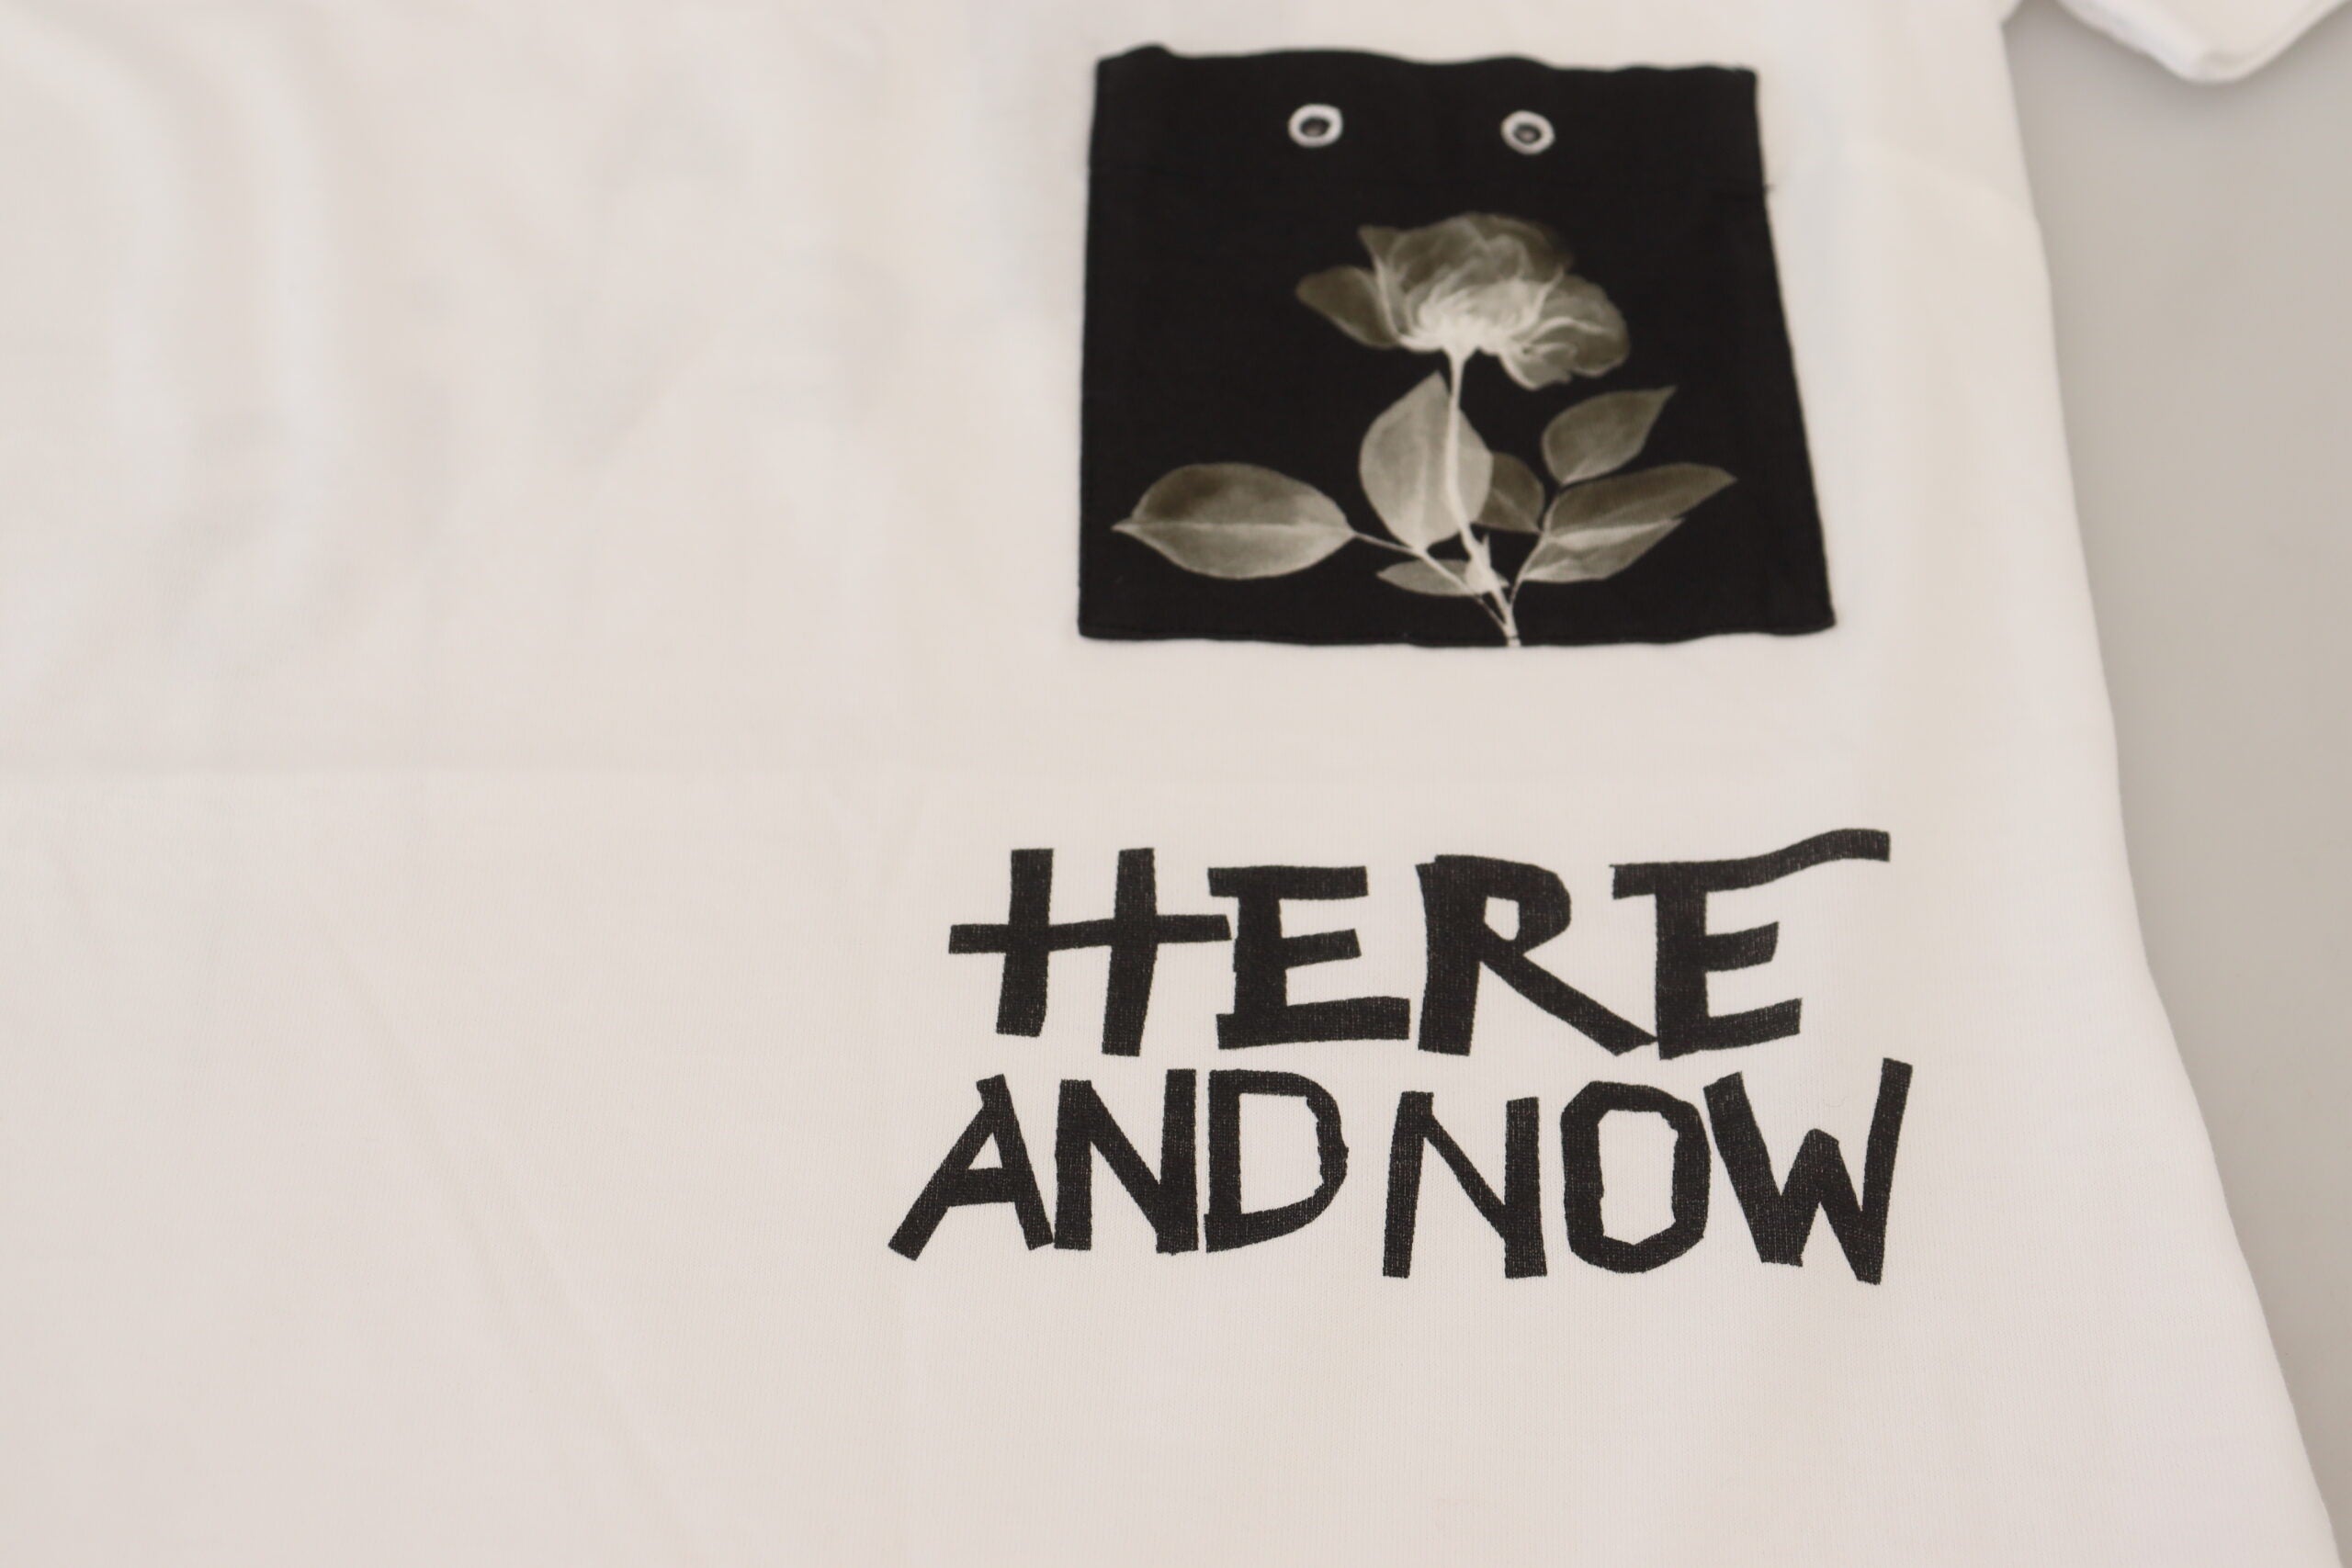 Dolce & Gabbana Chic Monochrome 'Here and Now' Cotton Tee